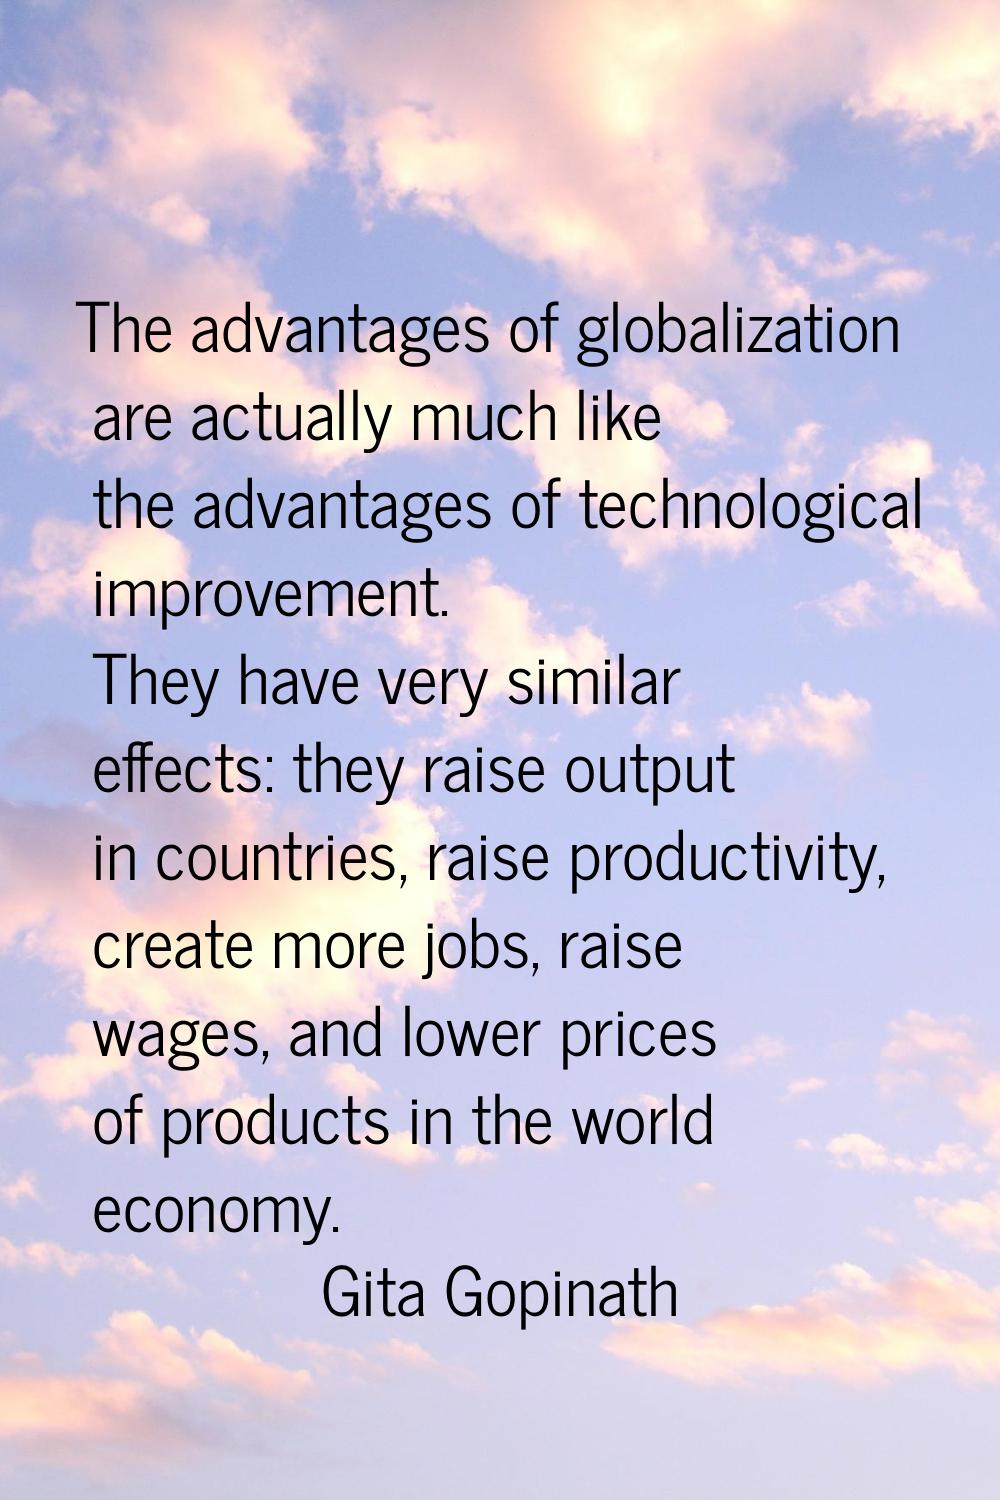 The advantages of globalization are actually much like the advantages of technological improvement.